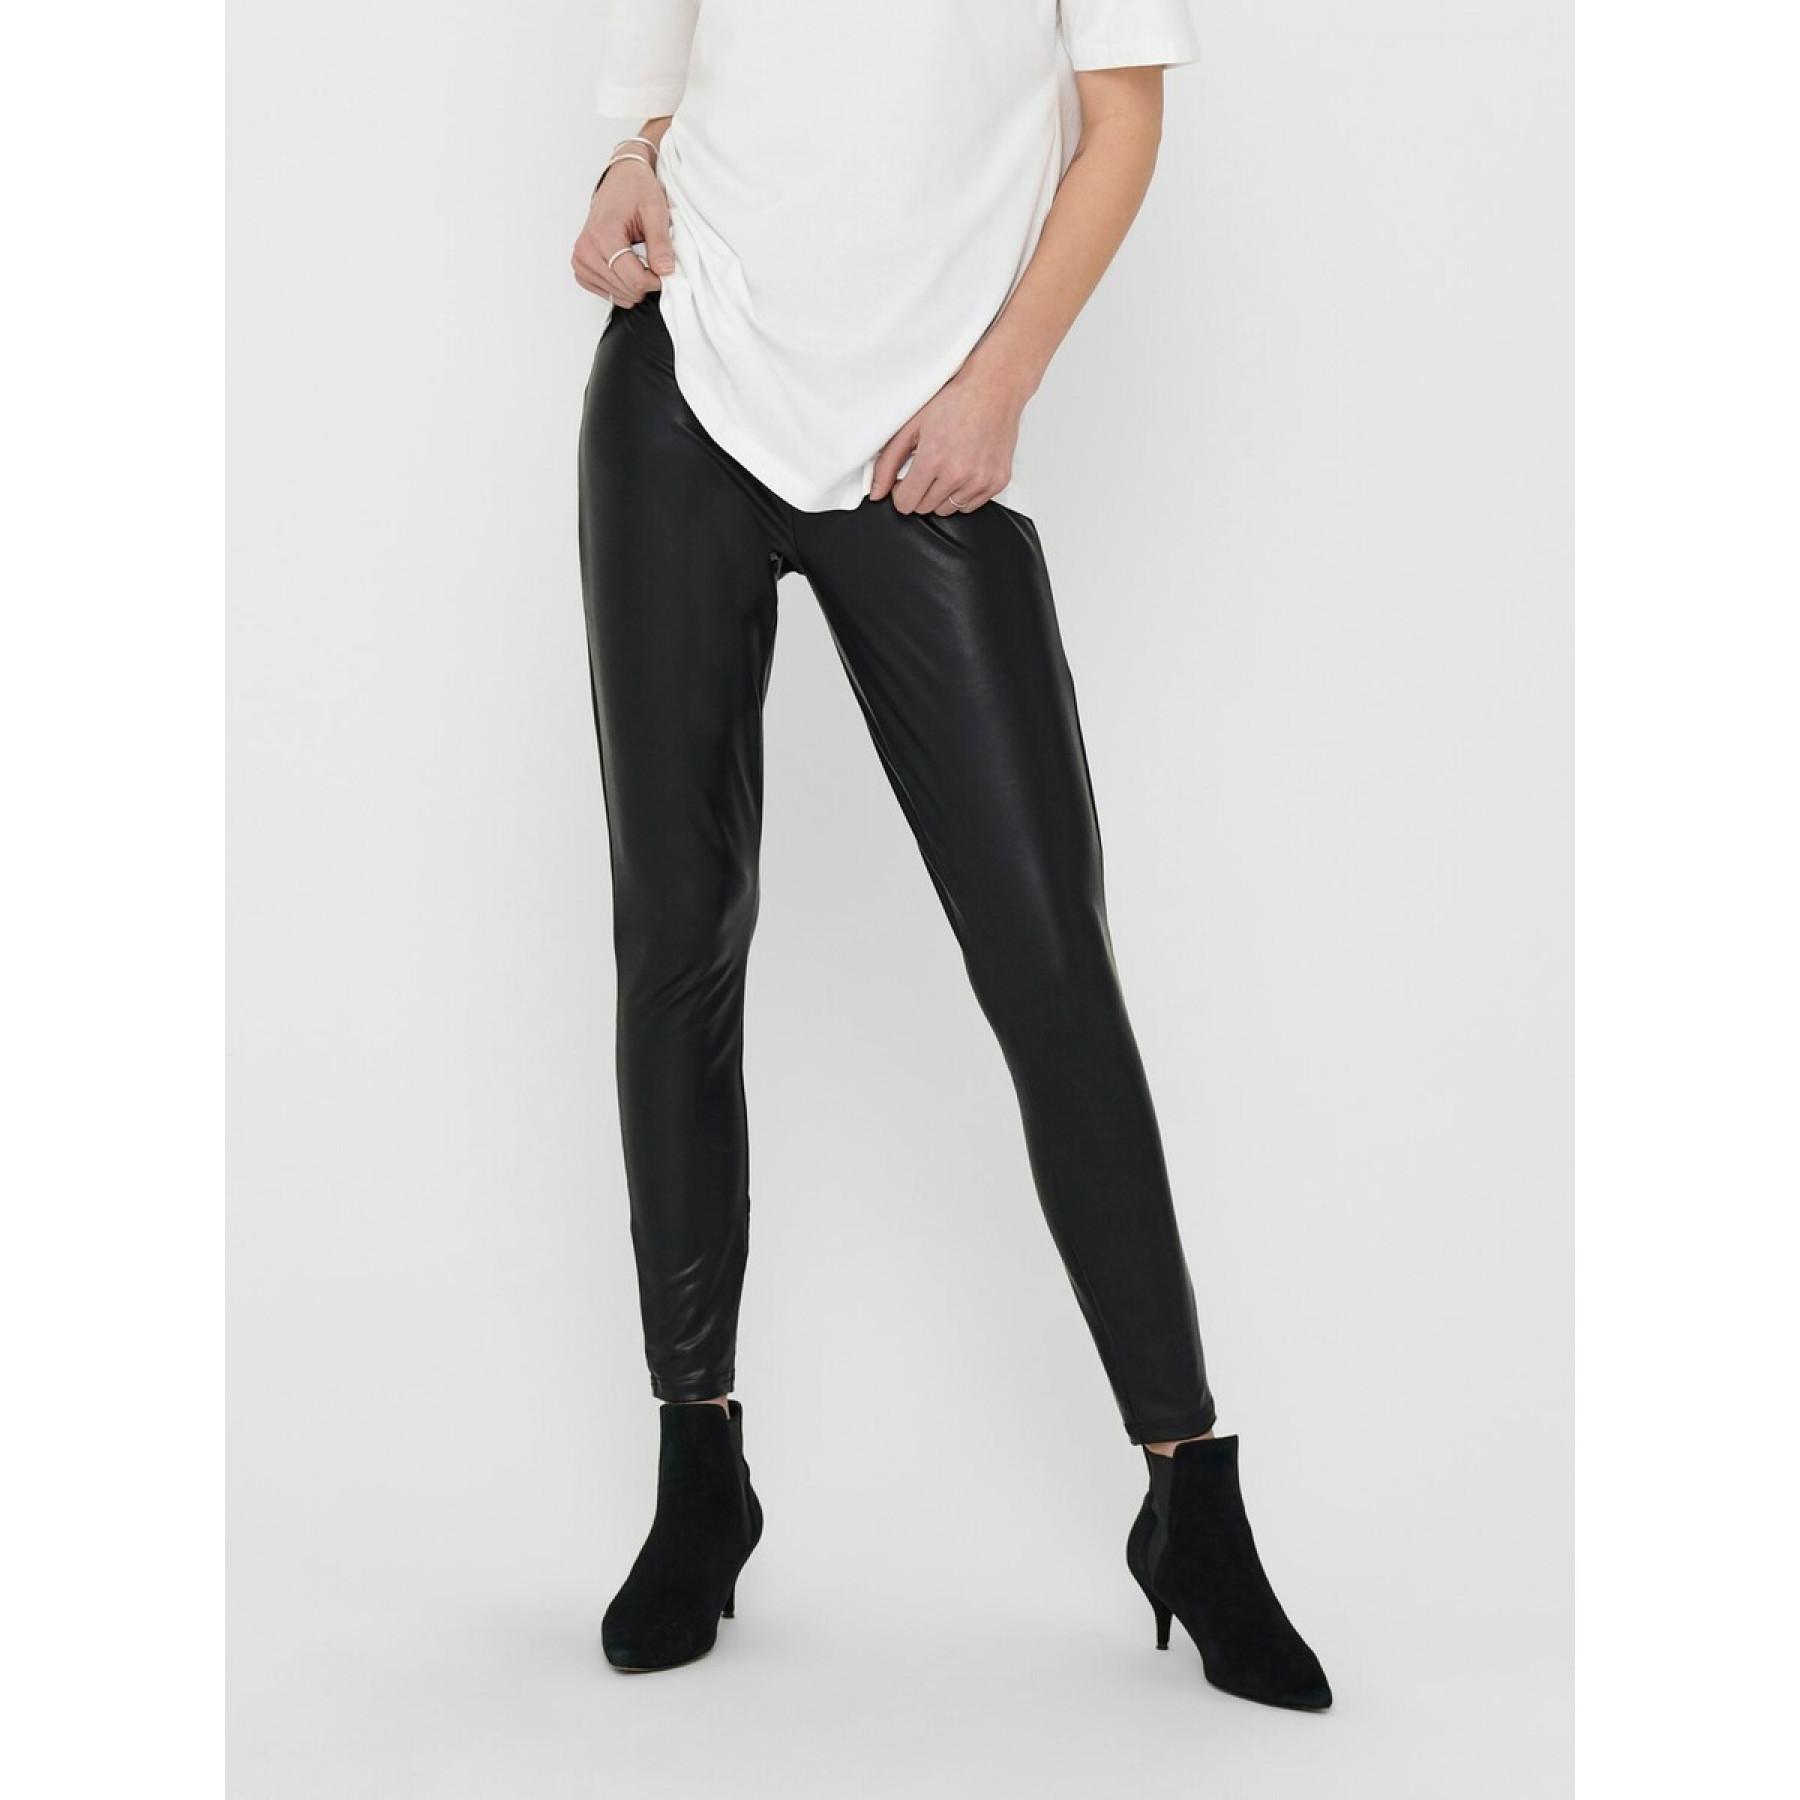 Women's Legging Only Cool coated